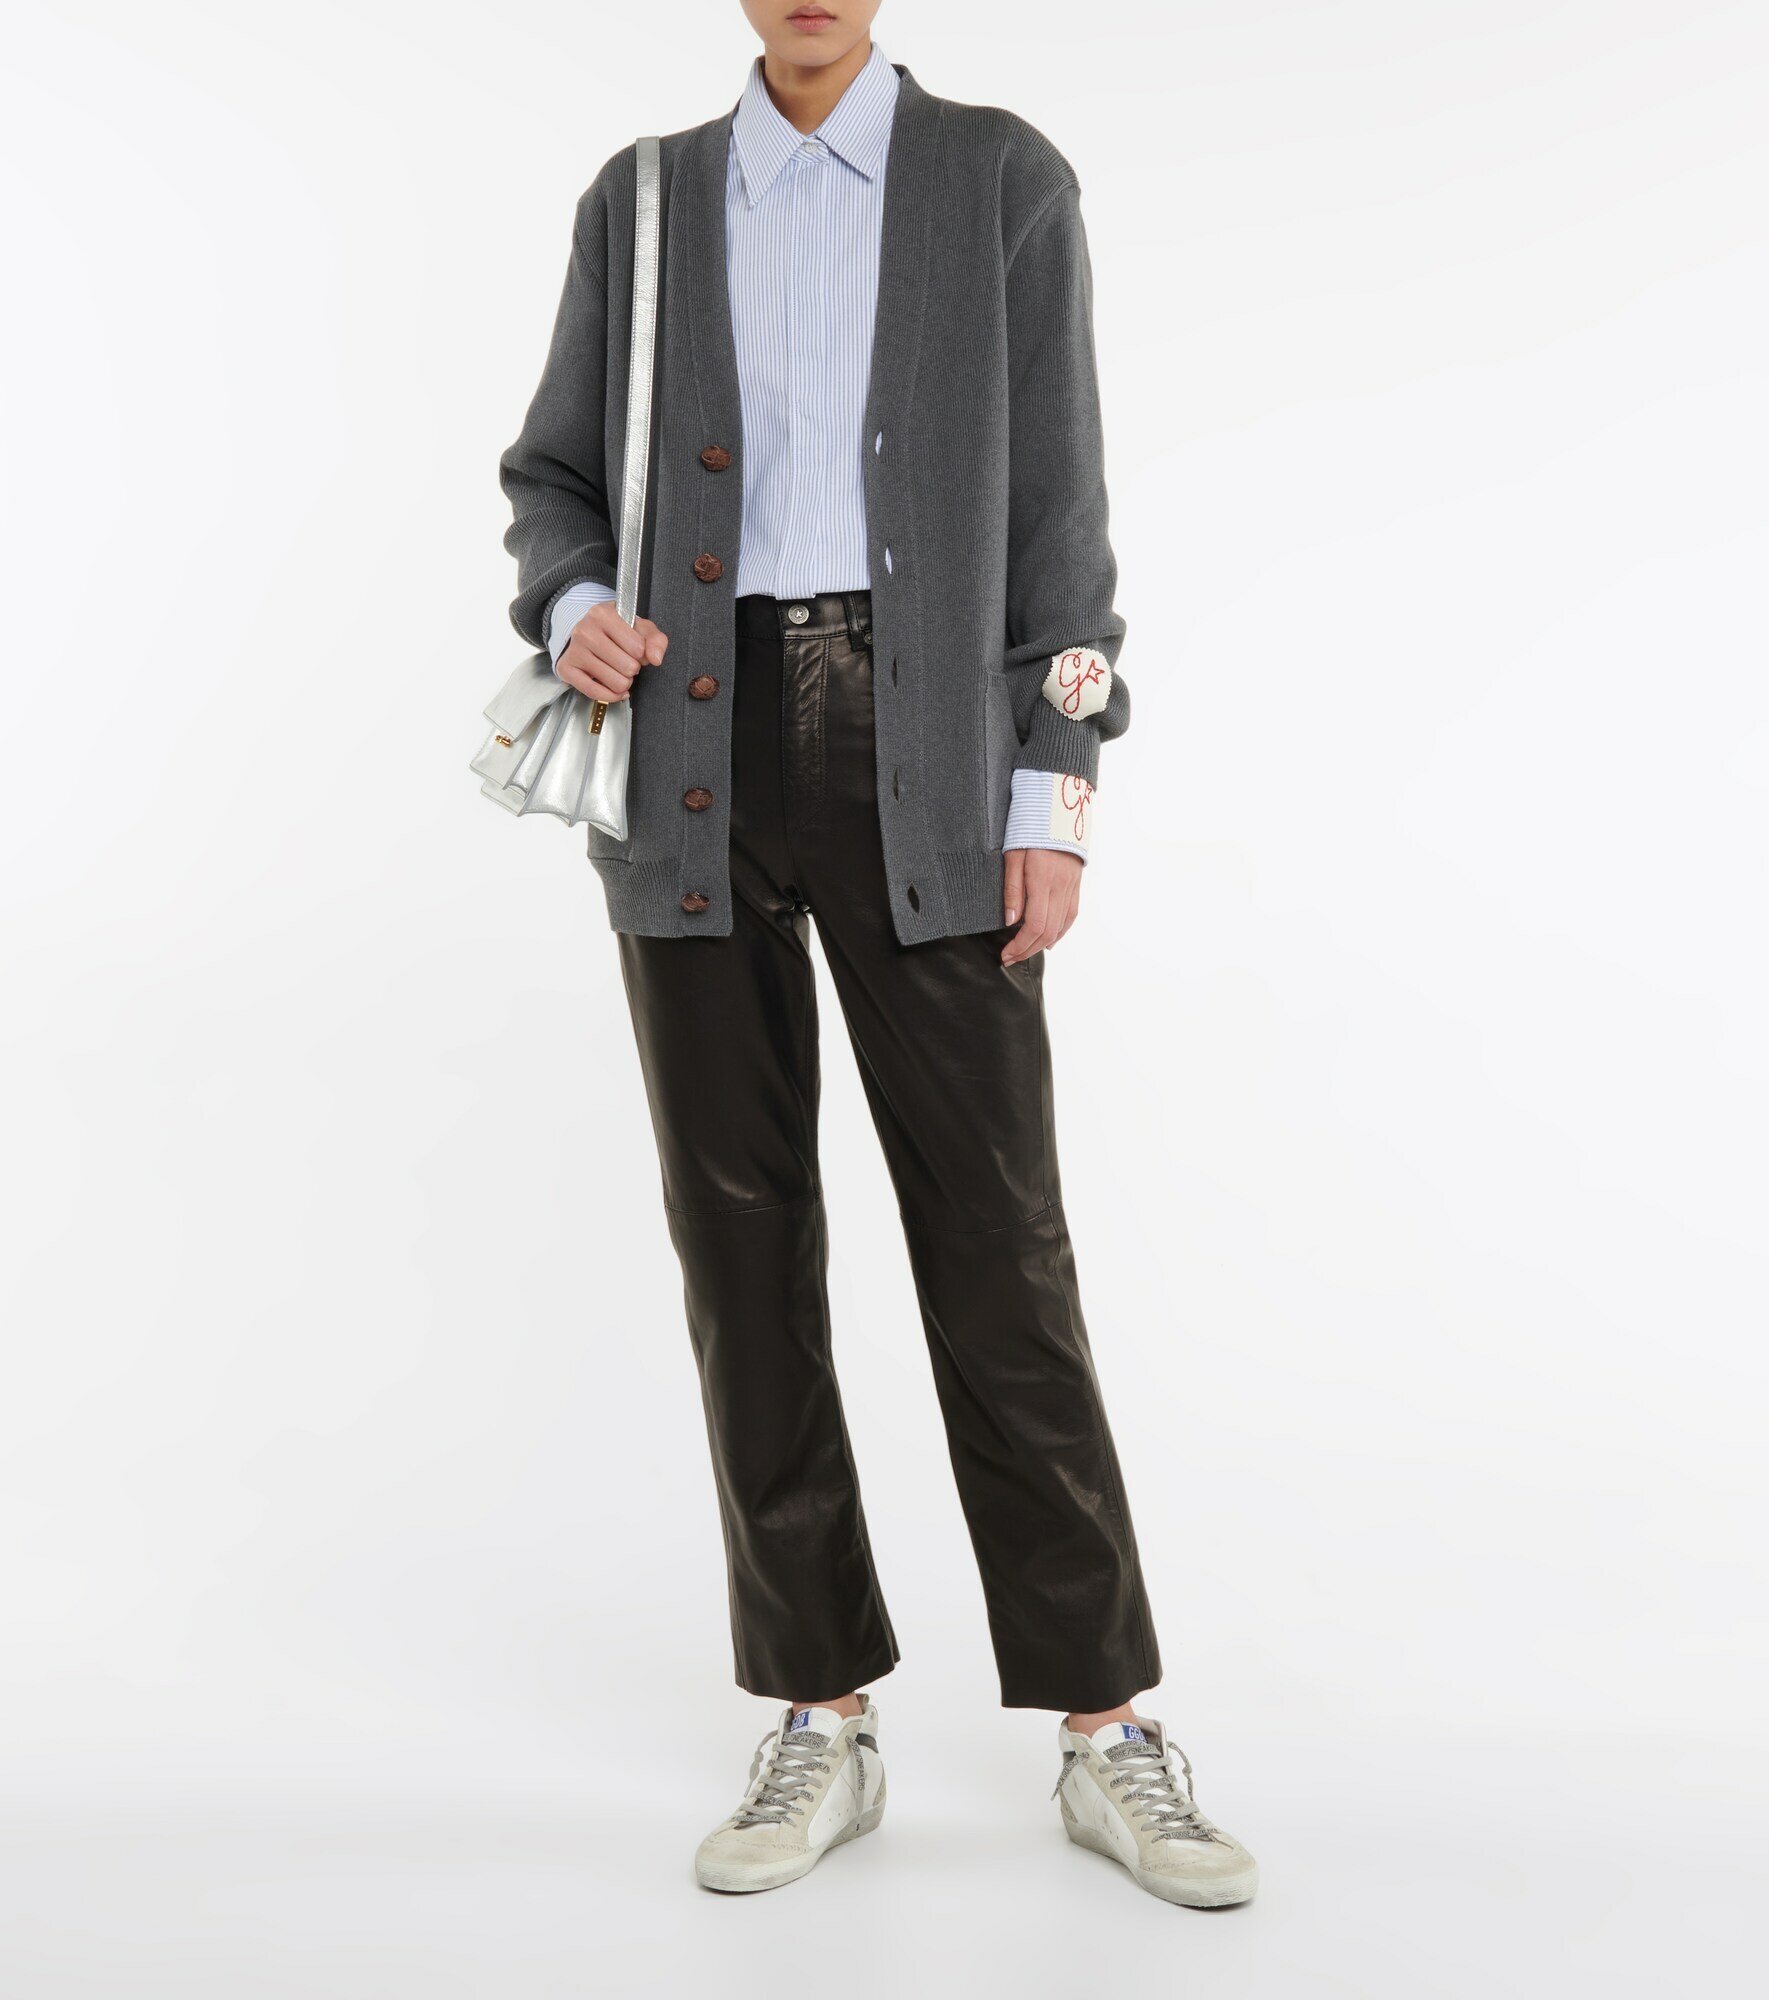 Golden Goose - High-rise leather flared pants Golden Goose Deluxe Brand